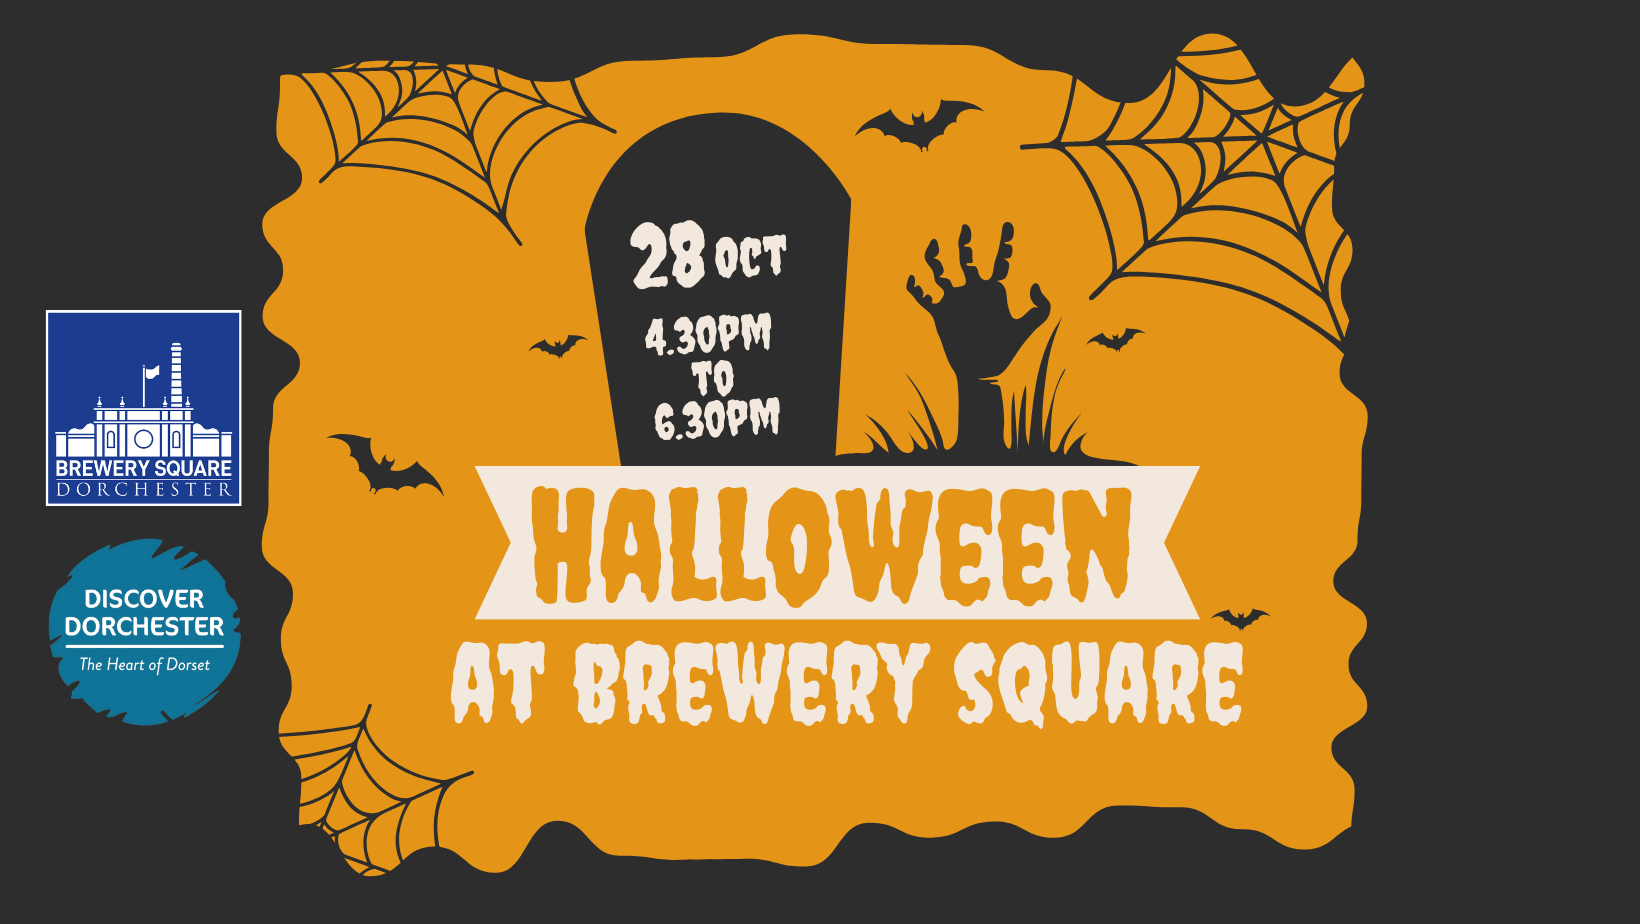 Halloween at Brewery Square